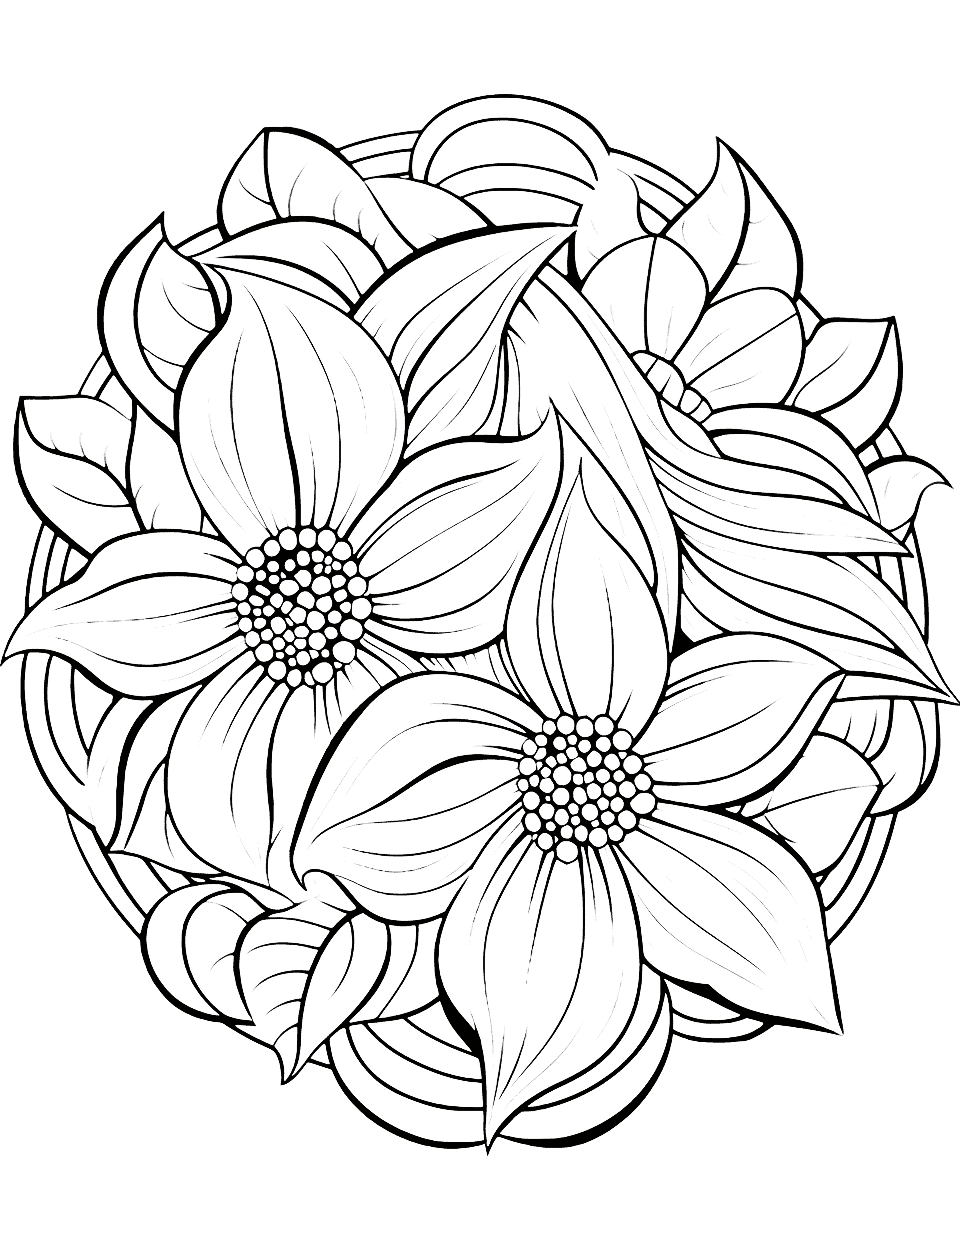 Tropical Floral Mandala Adult Coloring Page - A mandala formed from tropical flowers and leaves.